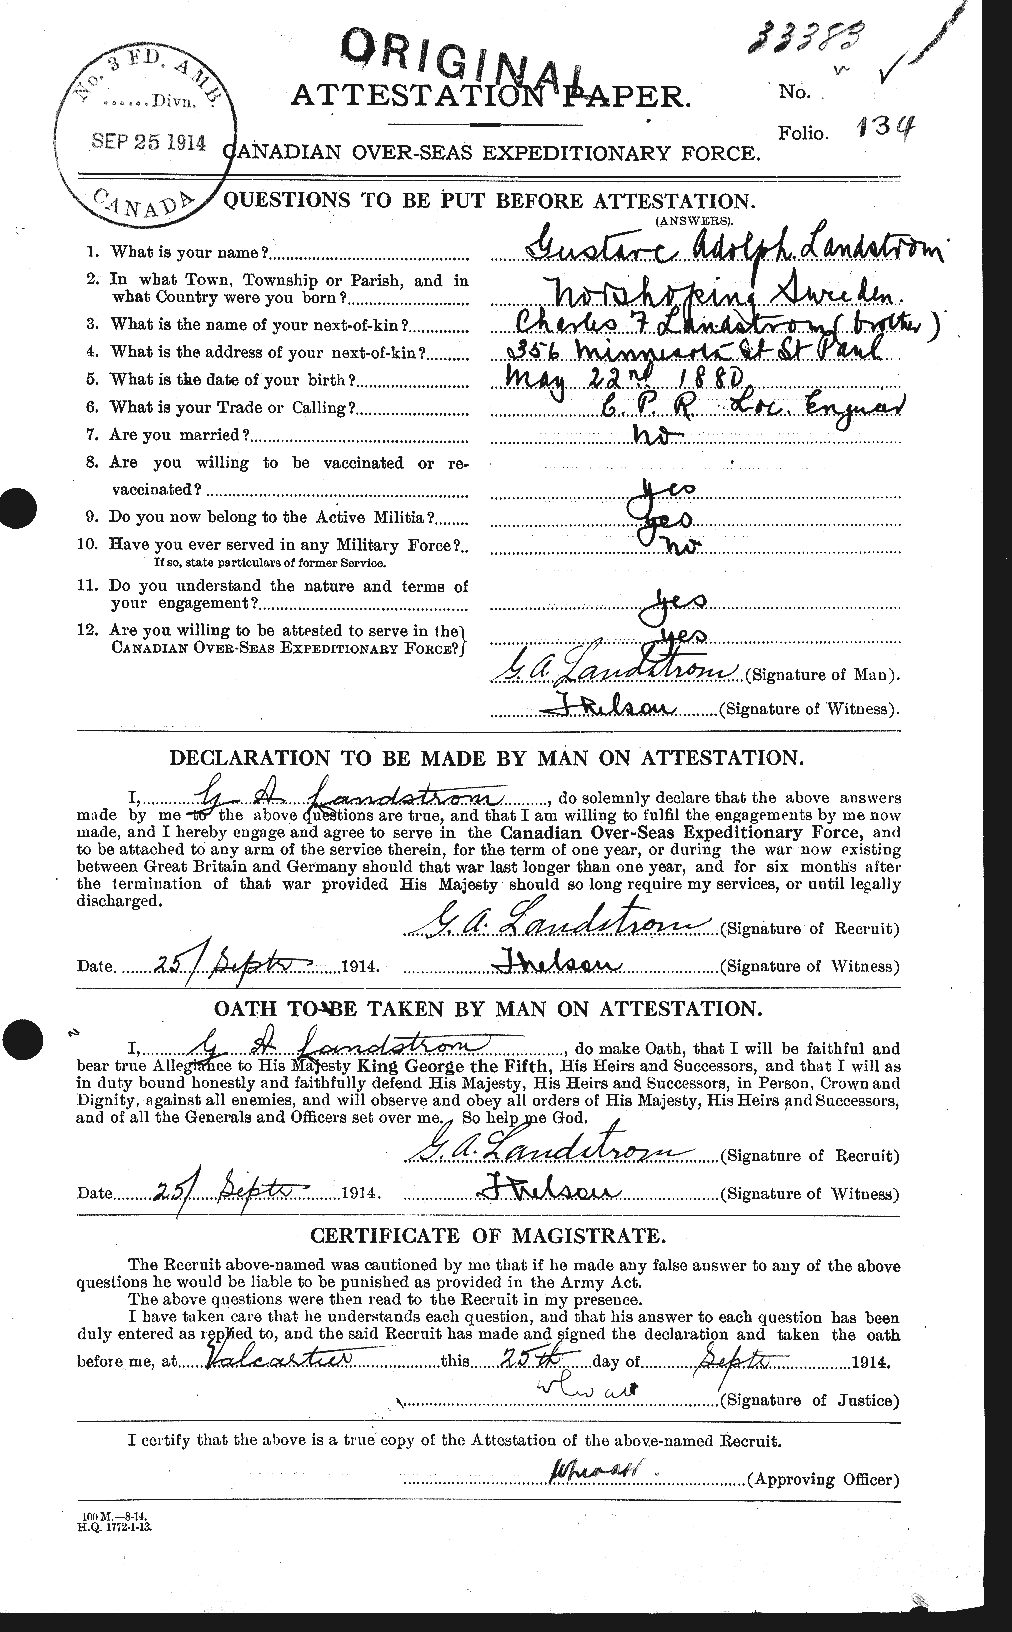 Personnel Records of the First World War - CEF 447455a